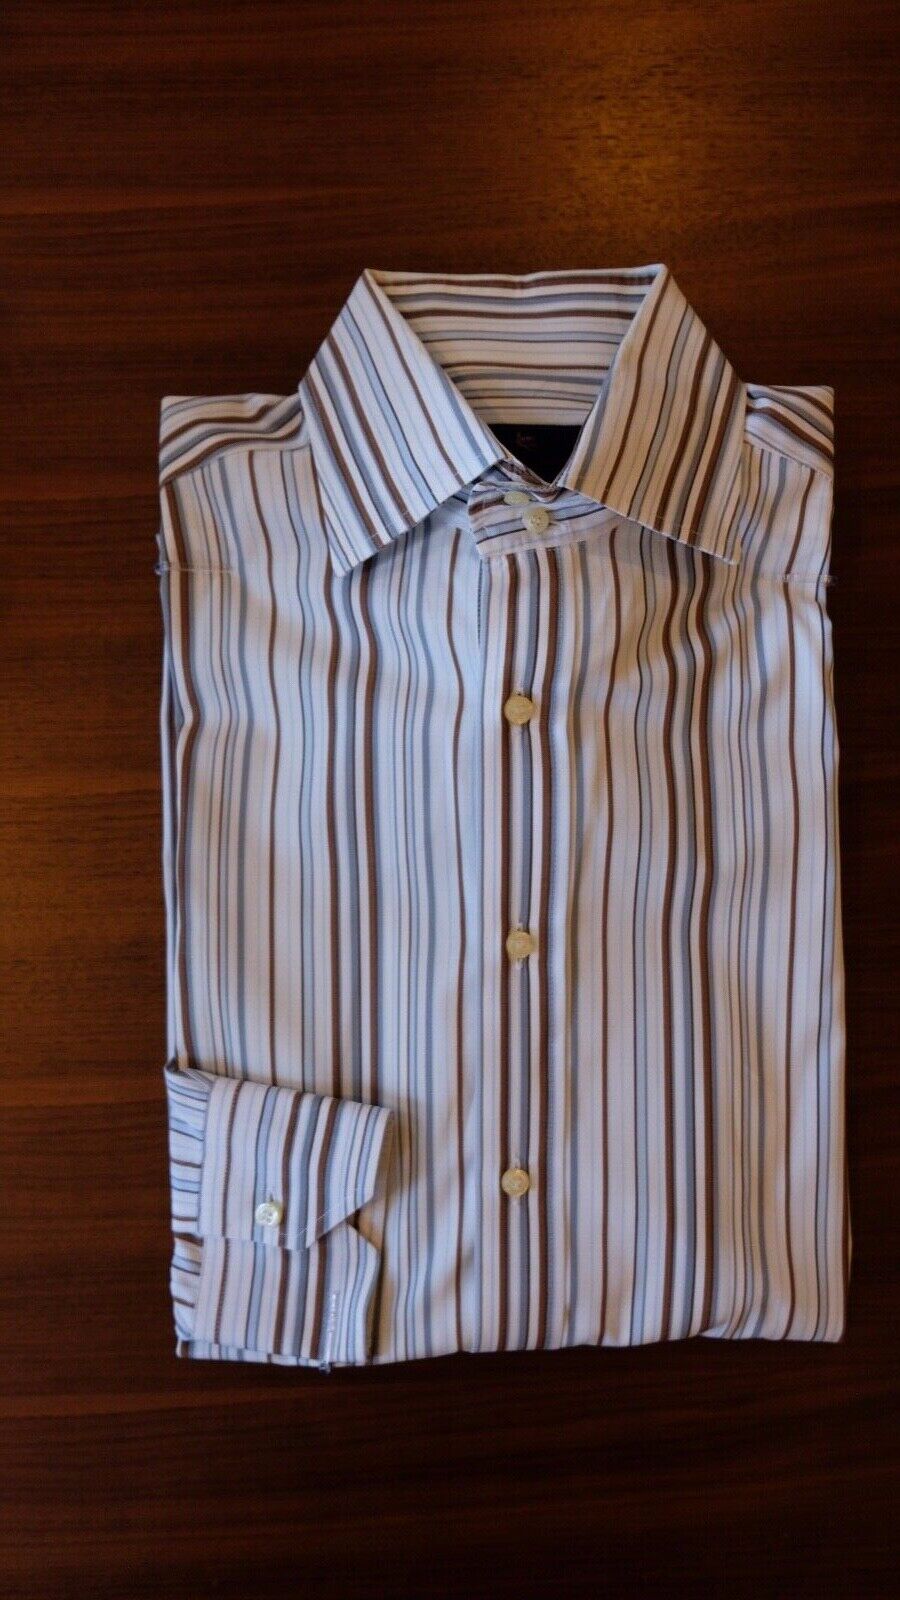 Etro Shirt 15.5 Striped White Brown Gray Spread Collar - Made in Italy